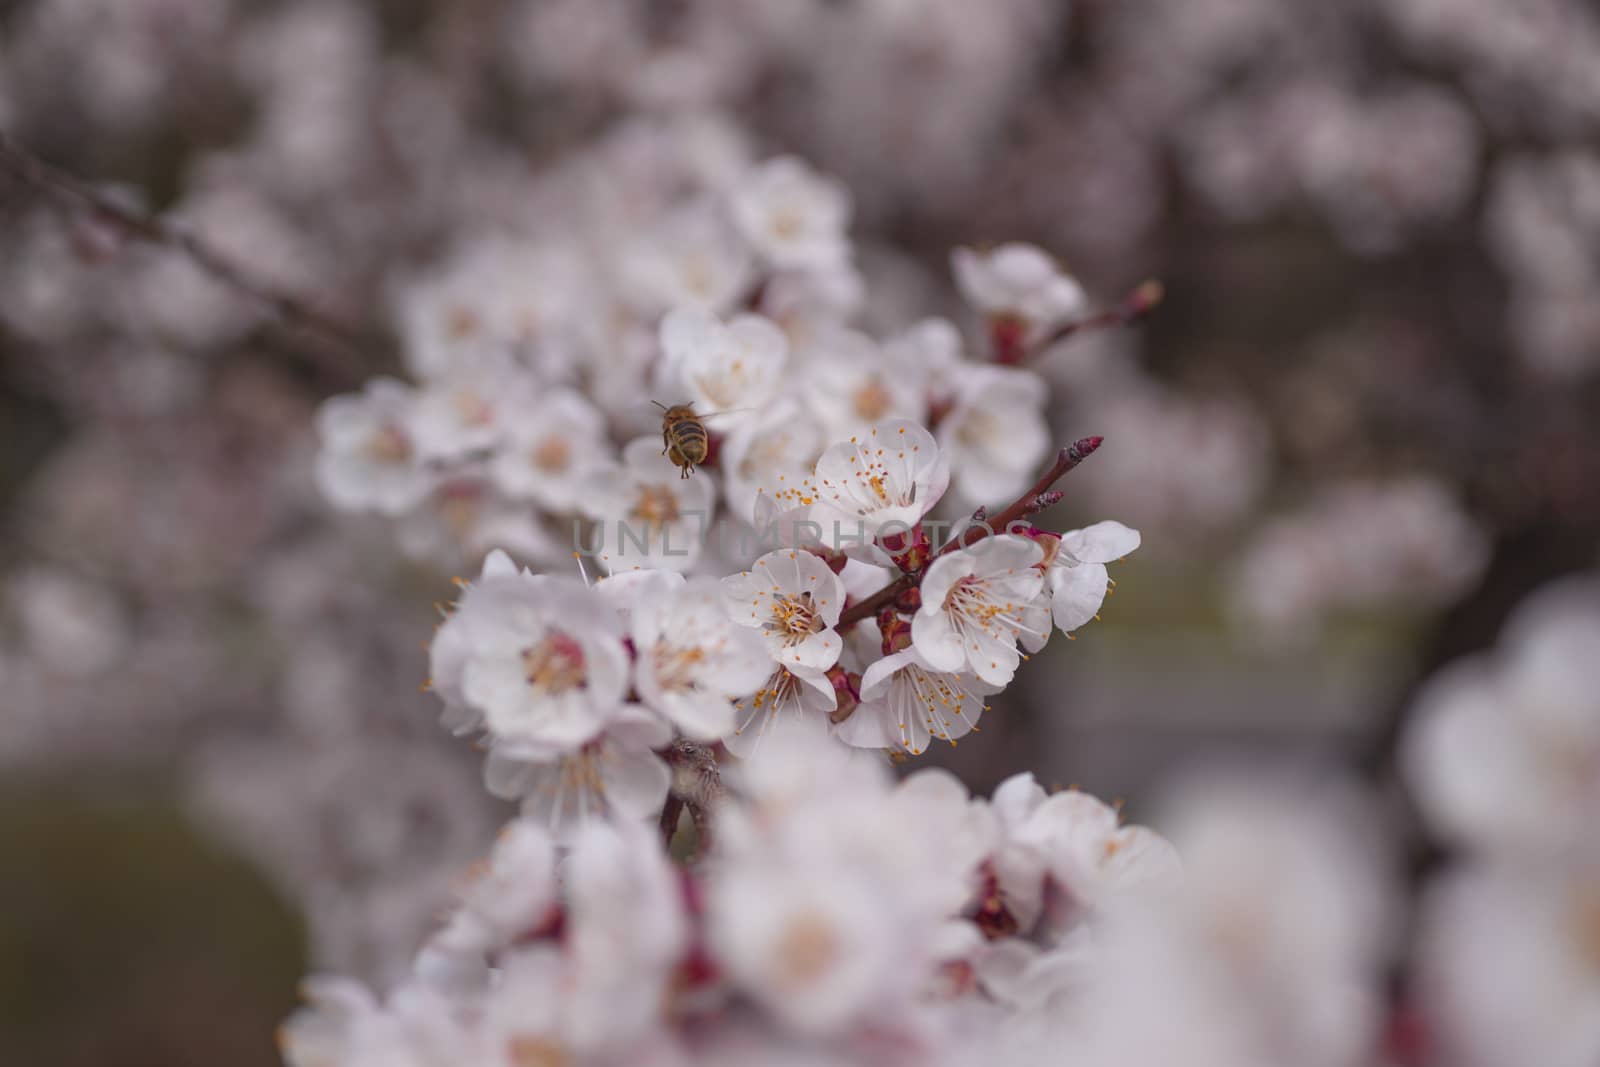 Apricot flower inflorescences on blurred background. by alexsdriver